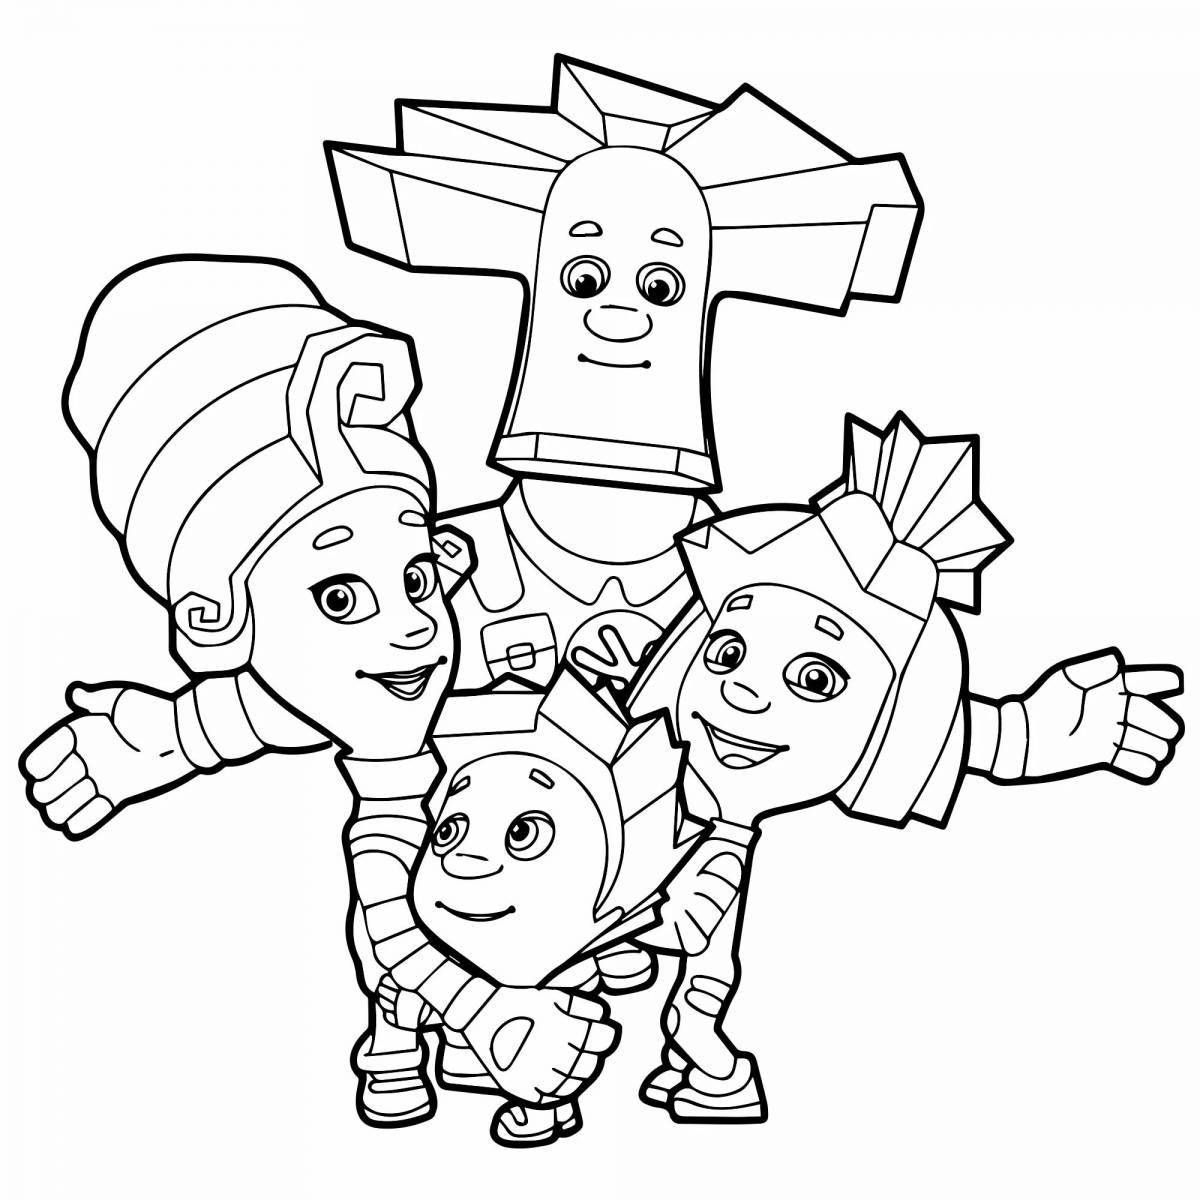 Color-loving fixies coloring pages for children 6-7 years old